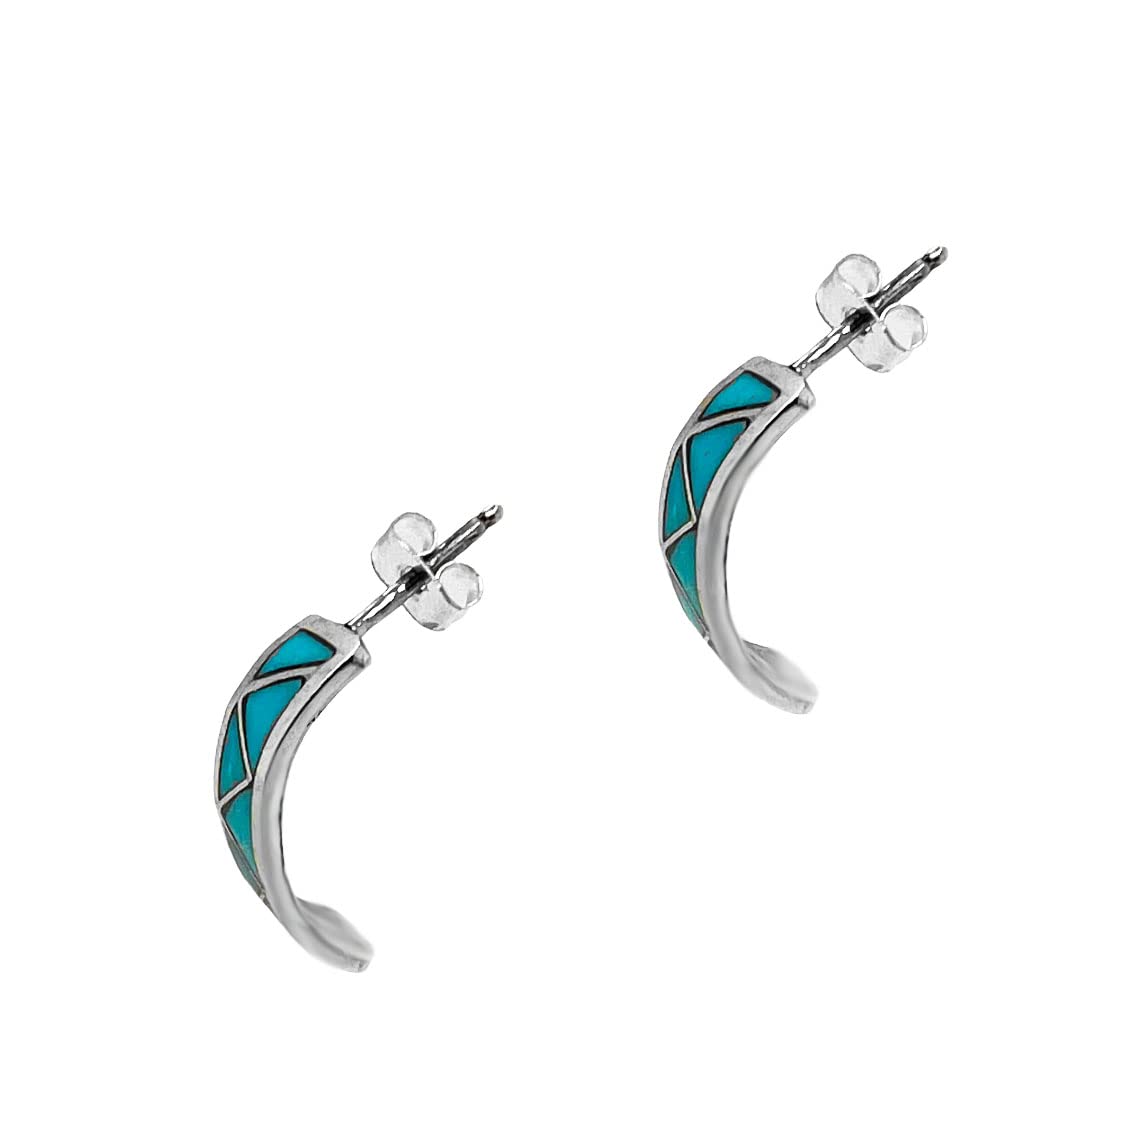 Genuine Sleeping Beauty Turquoise Half Hoop Earrings, Sterling Silver, Authentic Native American USA Handmade in New Mexico, Jewelry for Women, 925 Small Blue Hoops, Dangle Earring, Nickel Free